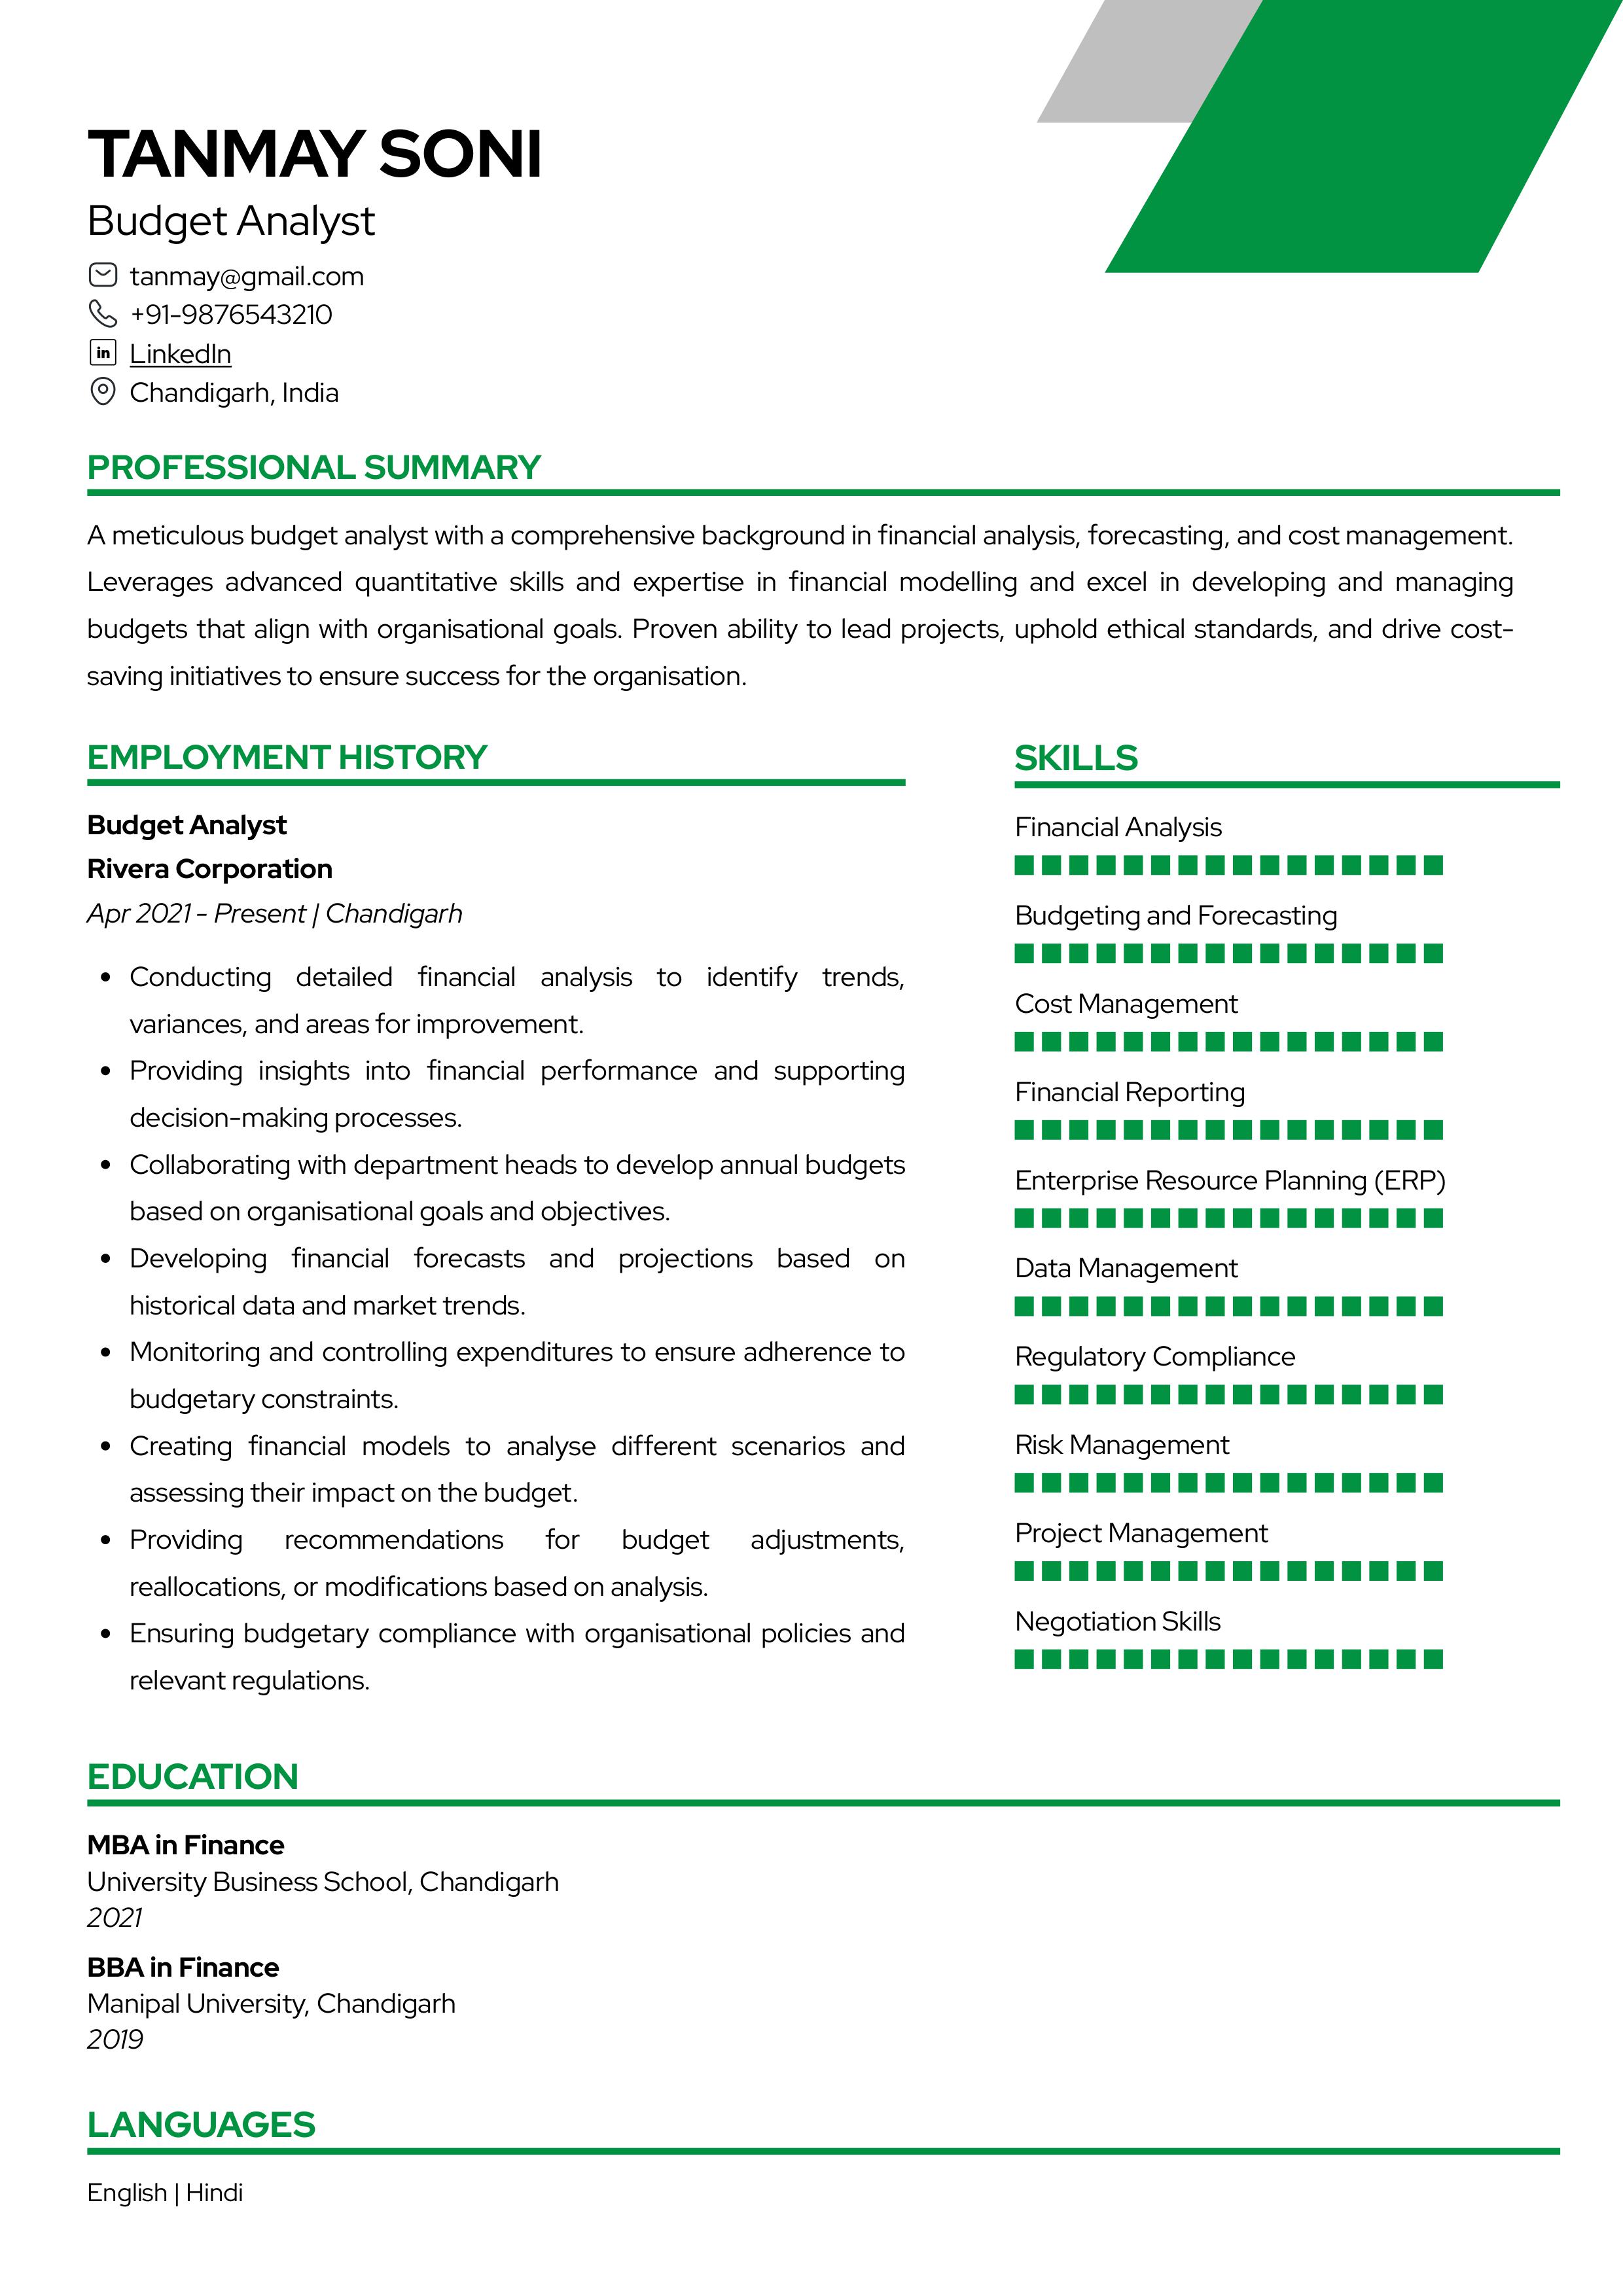 Sample Resume of Budget Analyst | Free Resume Templates & Samples on Resumod.co